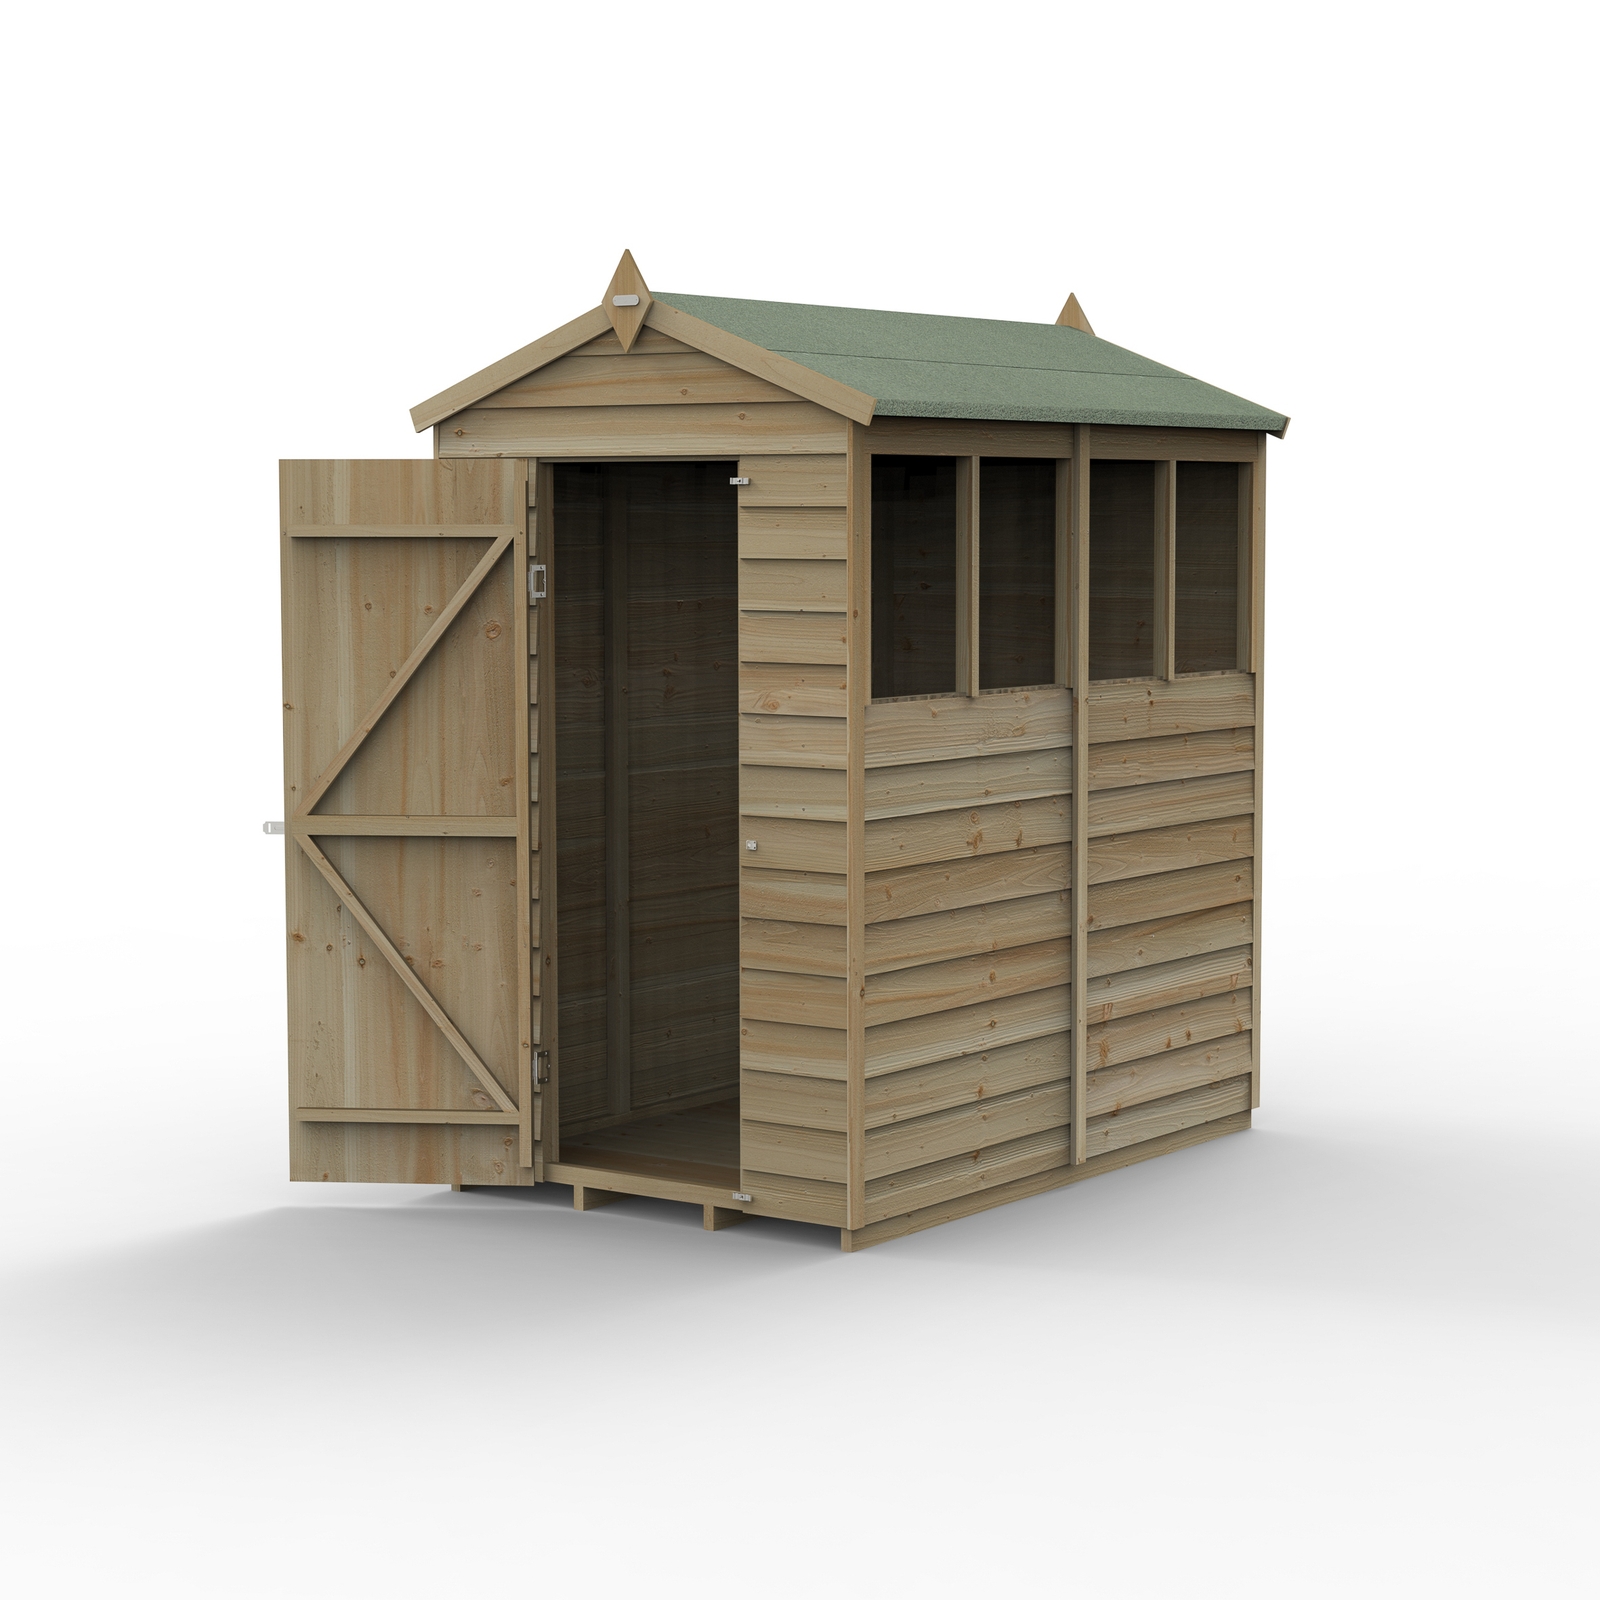 Forest Garden 4LIFE Apex Shed 4 x 6ft - Single Door 4 Window (Home Delivery)